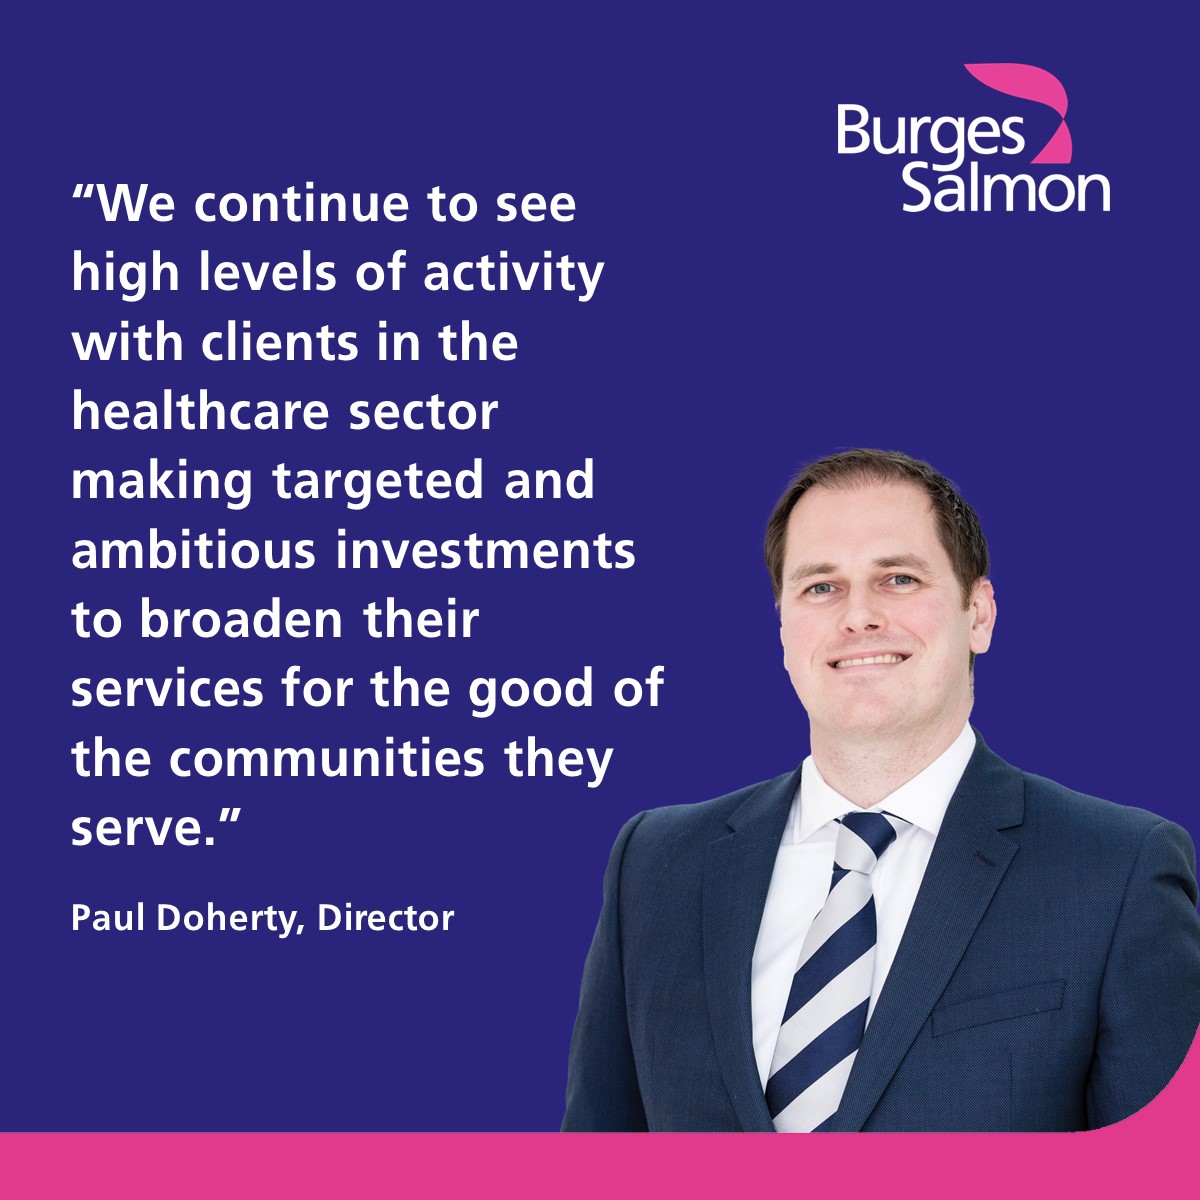 Our Healthcare sector team has advised Somerset Care Group as it continues to grow its portfolio of purpose-built, specialist care homes, with the acquisition of the award-winning Green Tree Court nursing home. Read the full story here: bsalmon.us/3yvu4xq #socialcare